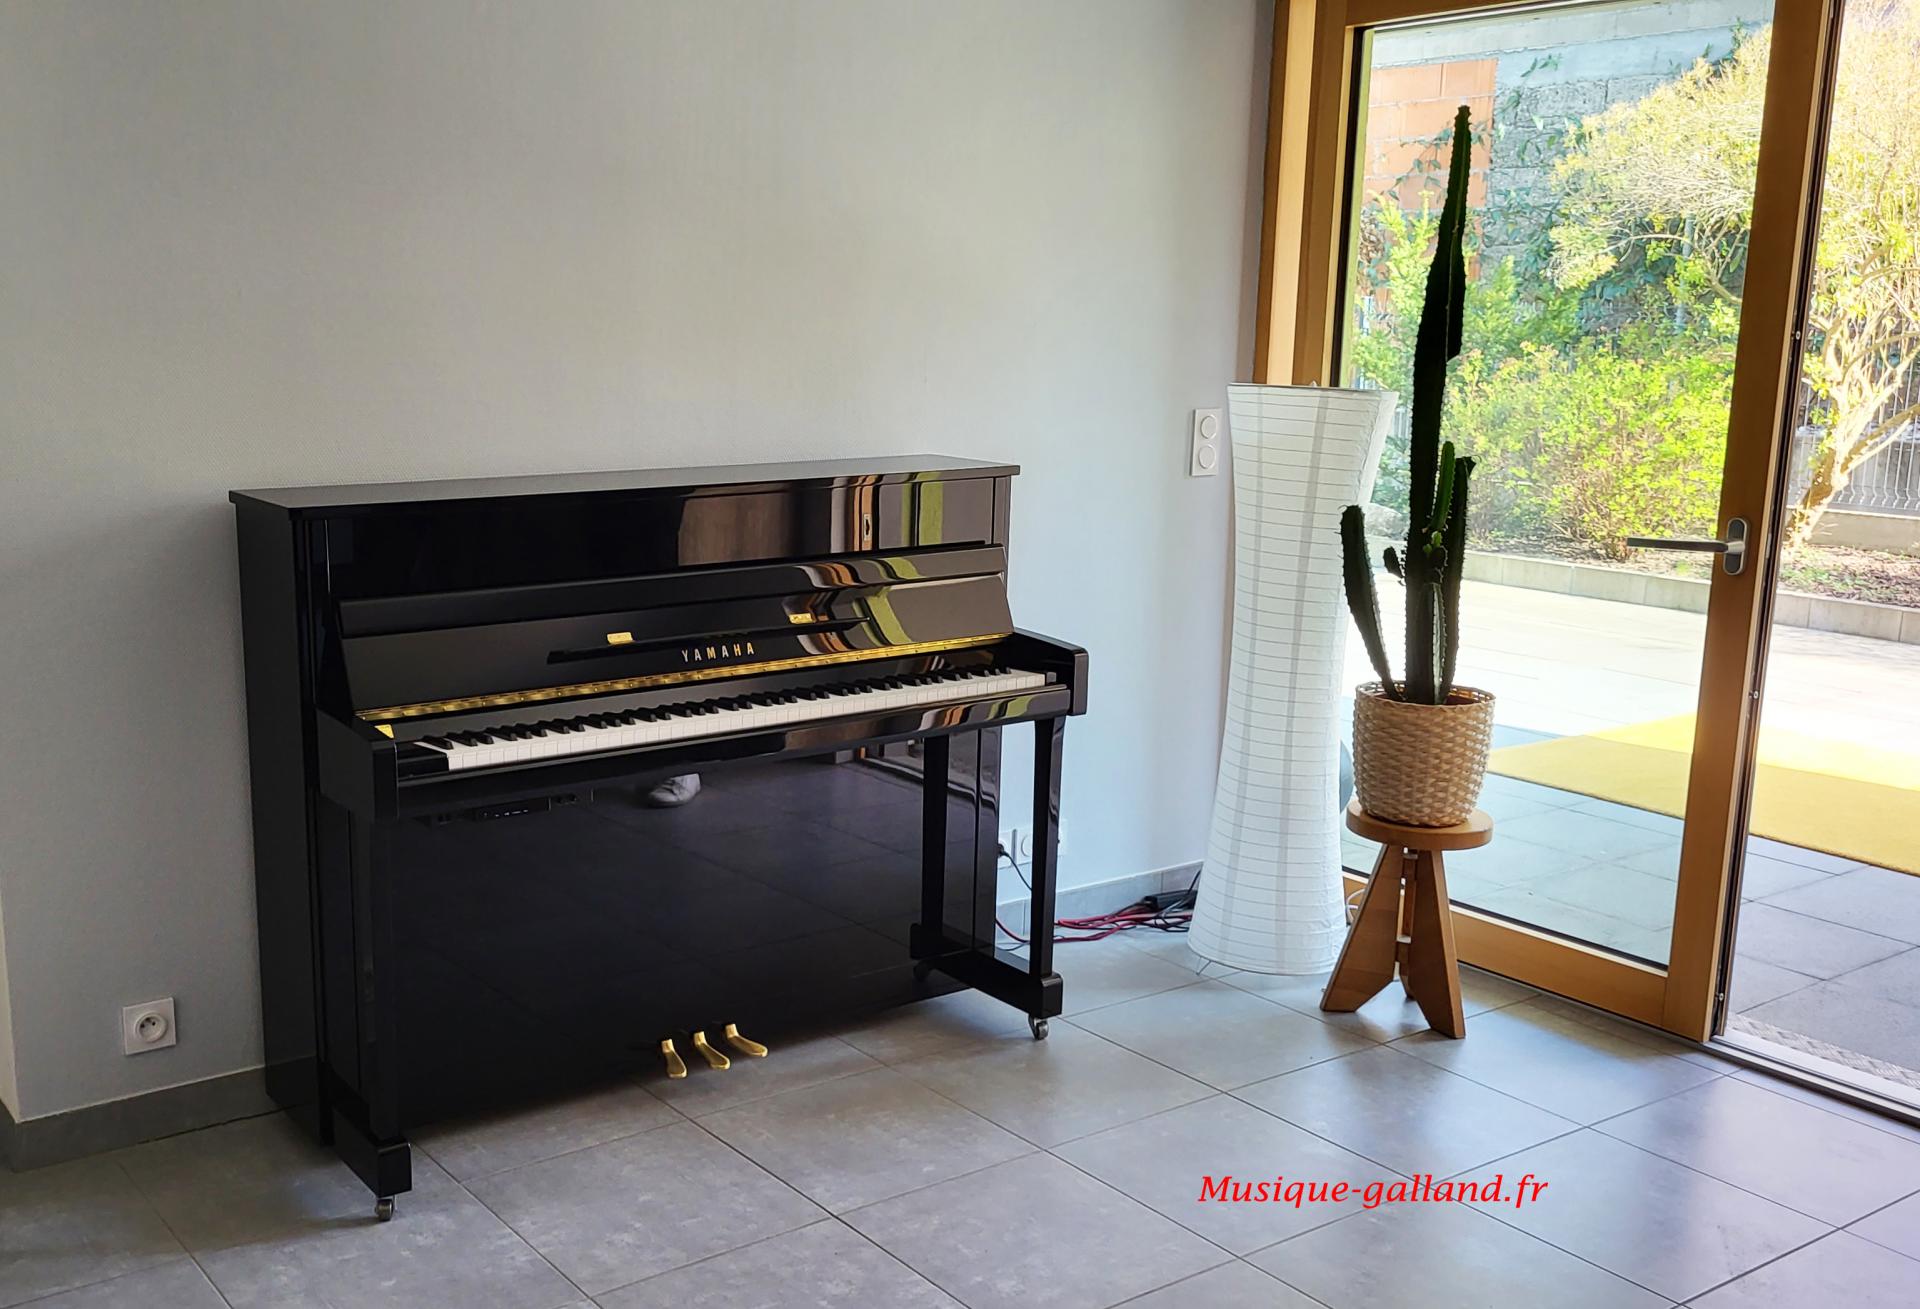 Piano droit BECHSTEIN Concert 8 - FRANCE PIANOS